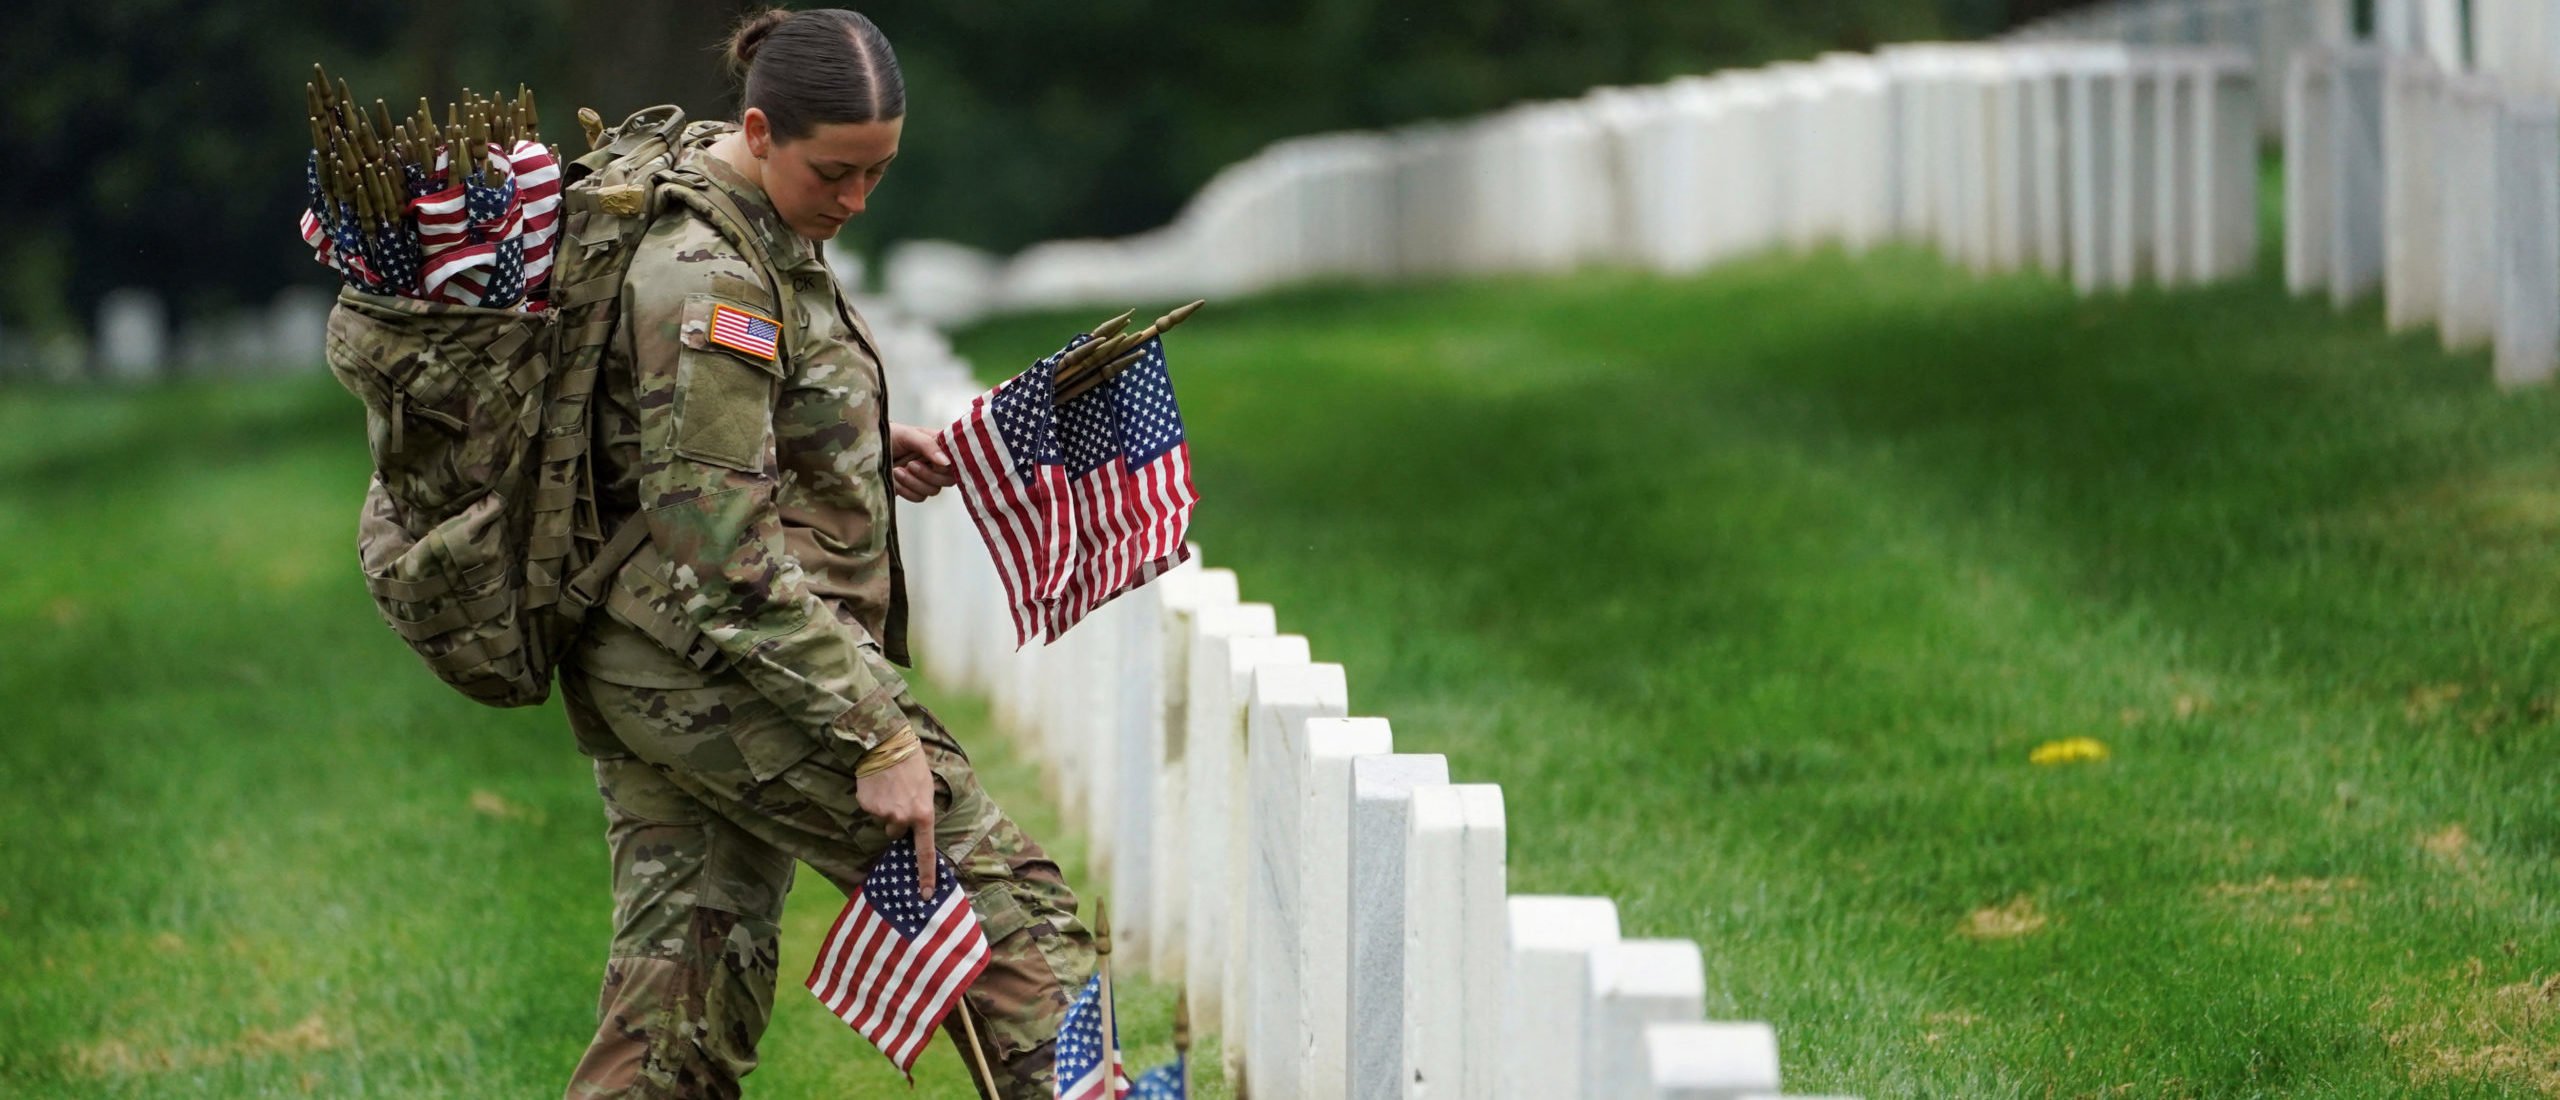 MORGAN MURPHY: This Memorial Day Remember The Ongoing Sacrifices Of Our Military And Their Families